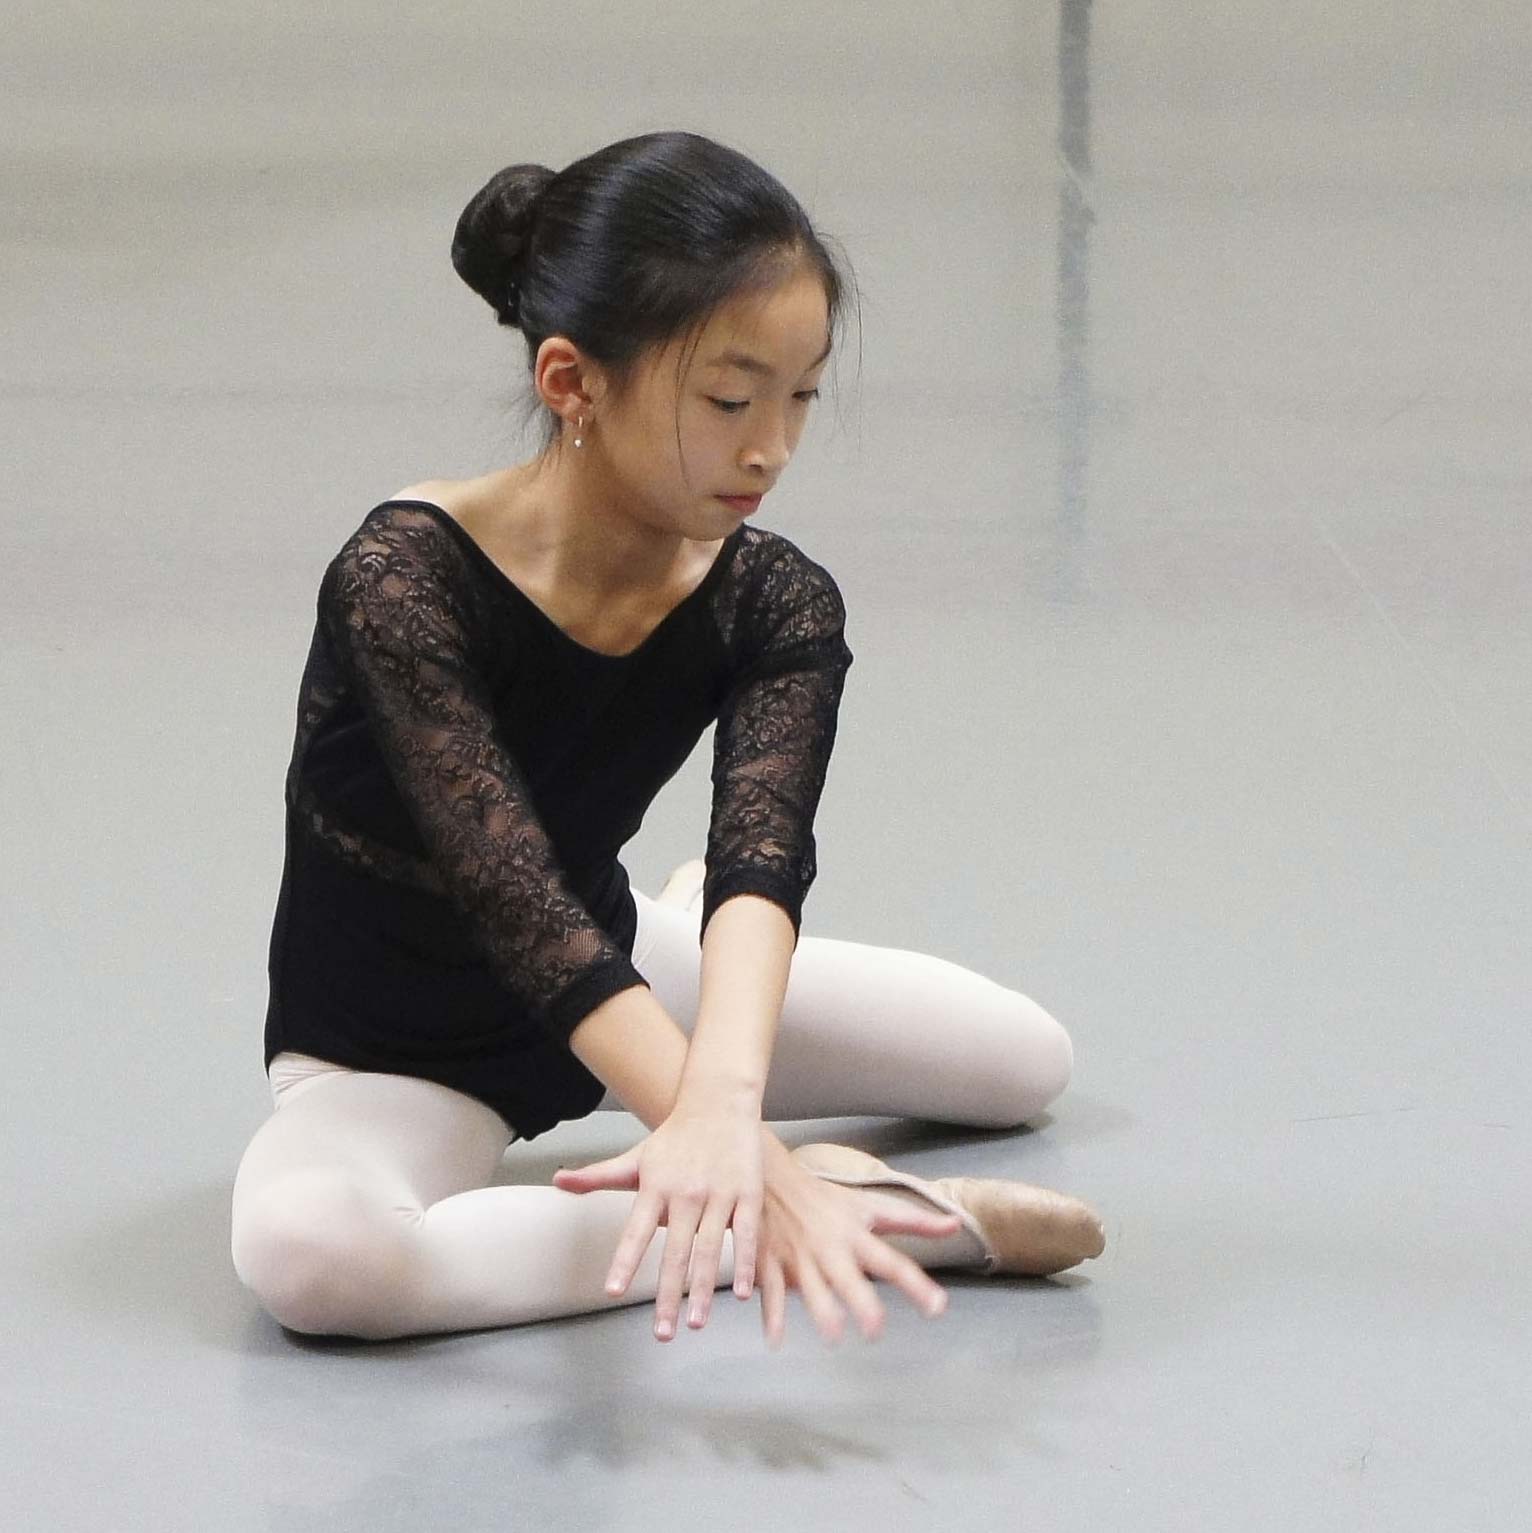 Young ballet dancer sitting on floor performing gesture movement with hands.